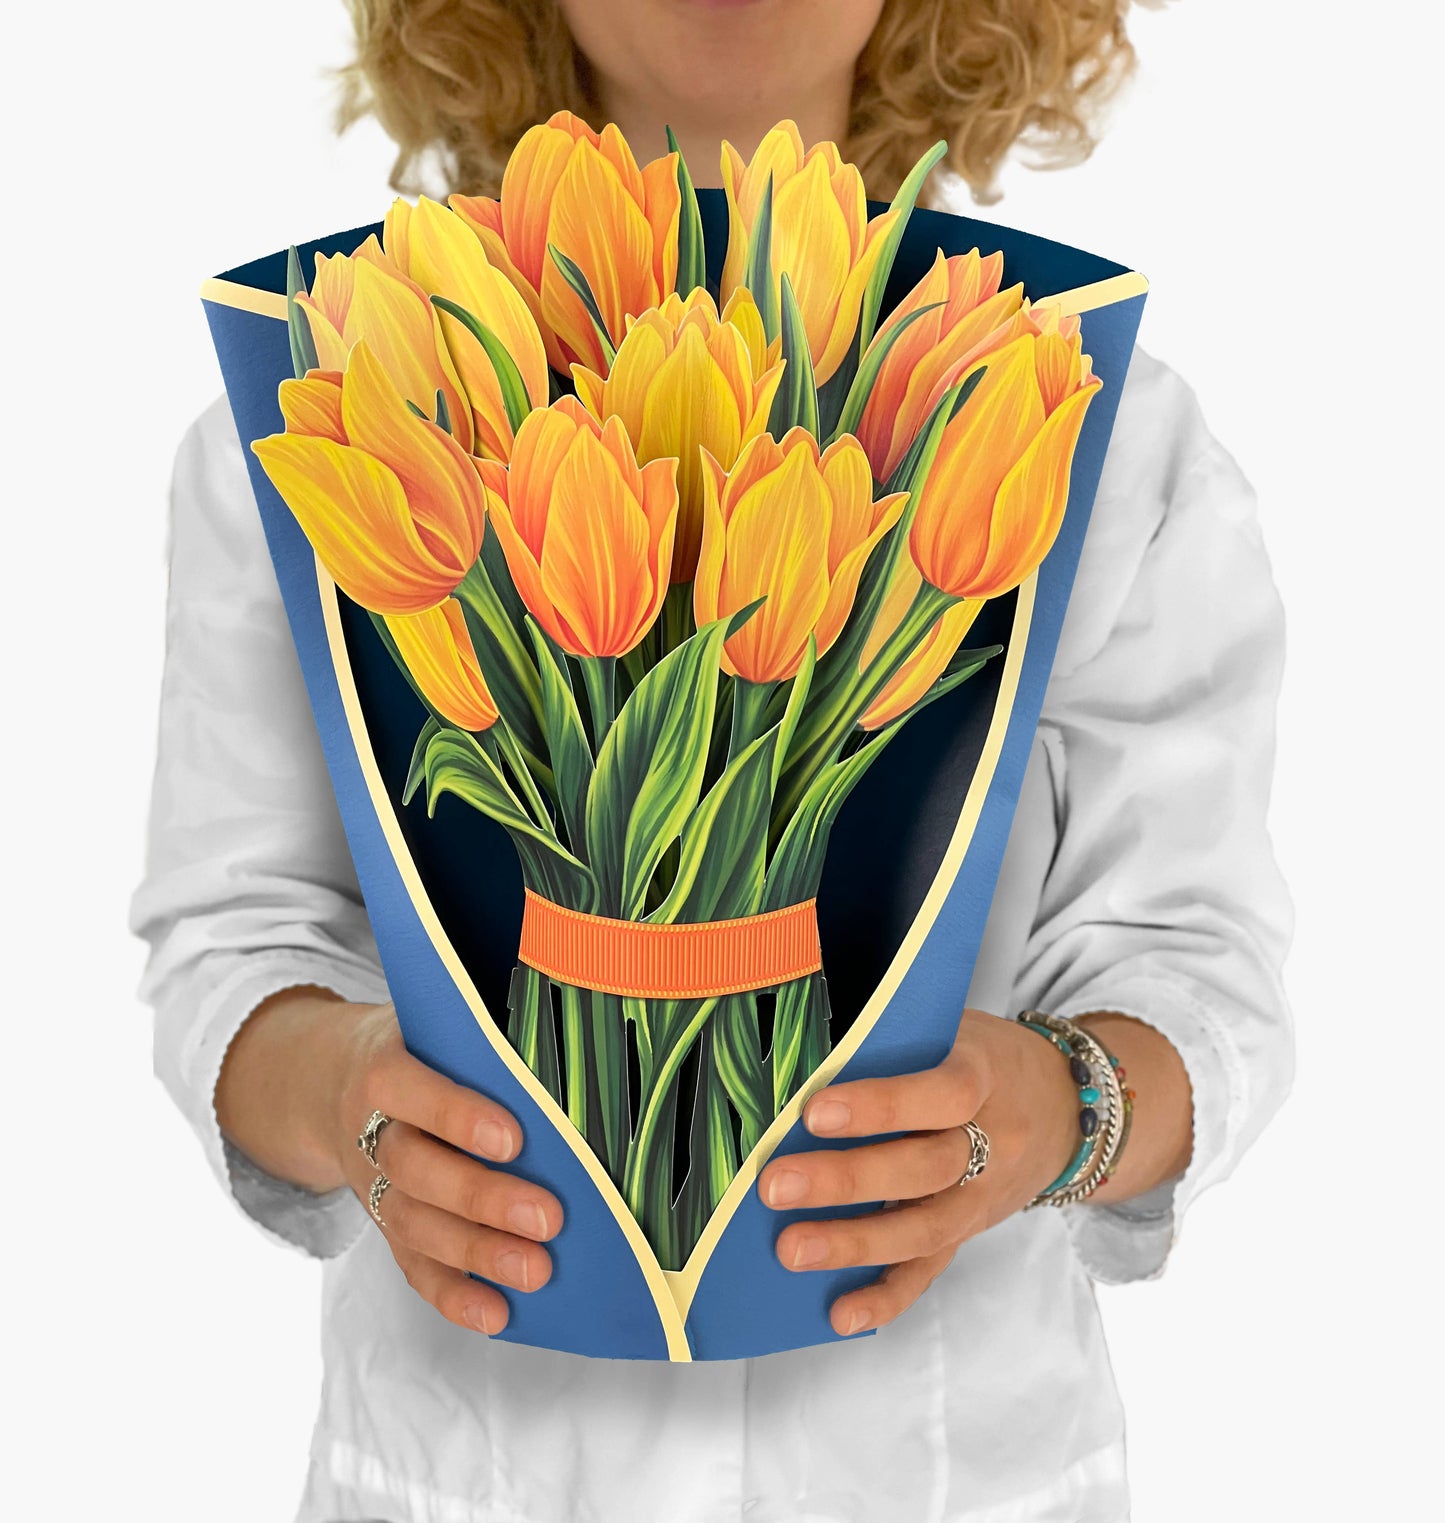 Yellow Tulips Pop-Up Greeting Card